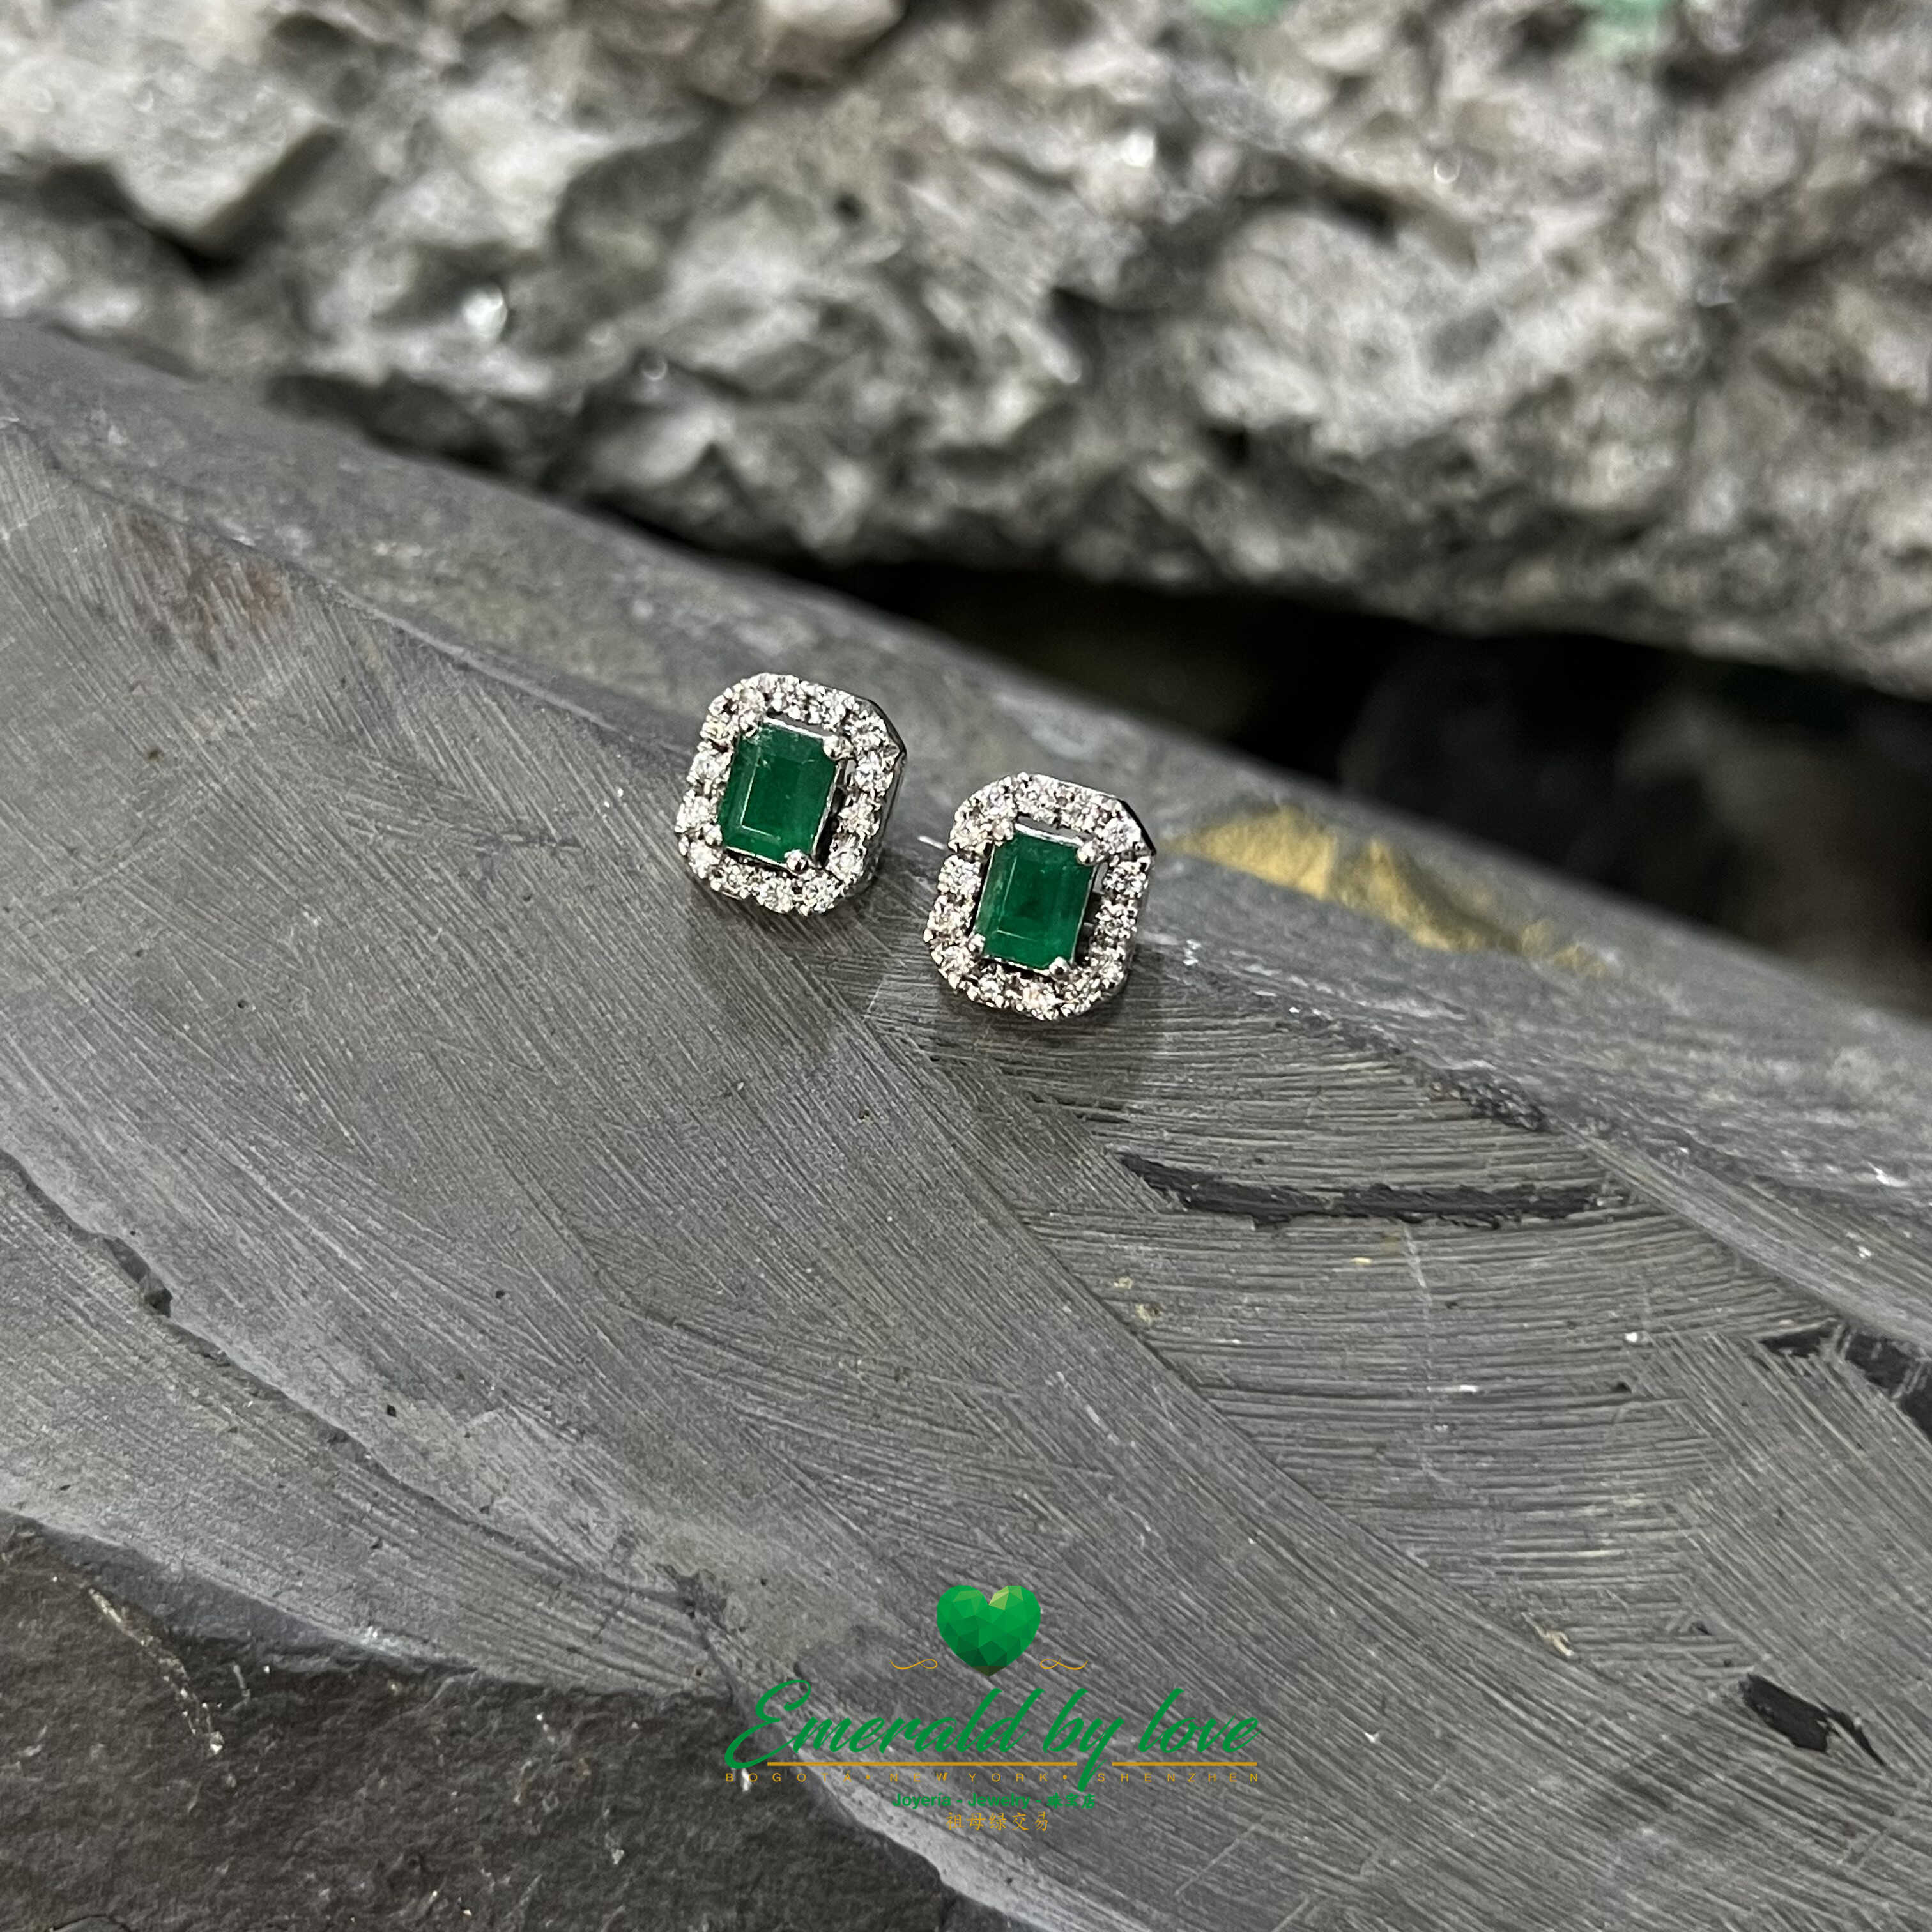 Regal Marquise White Gold Earrings with 1.10 tcw Emerald Cut Emeralds and 0.28 tcw Diamonds